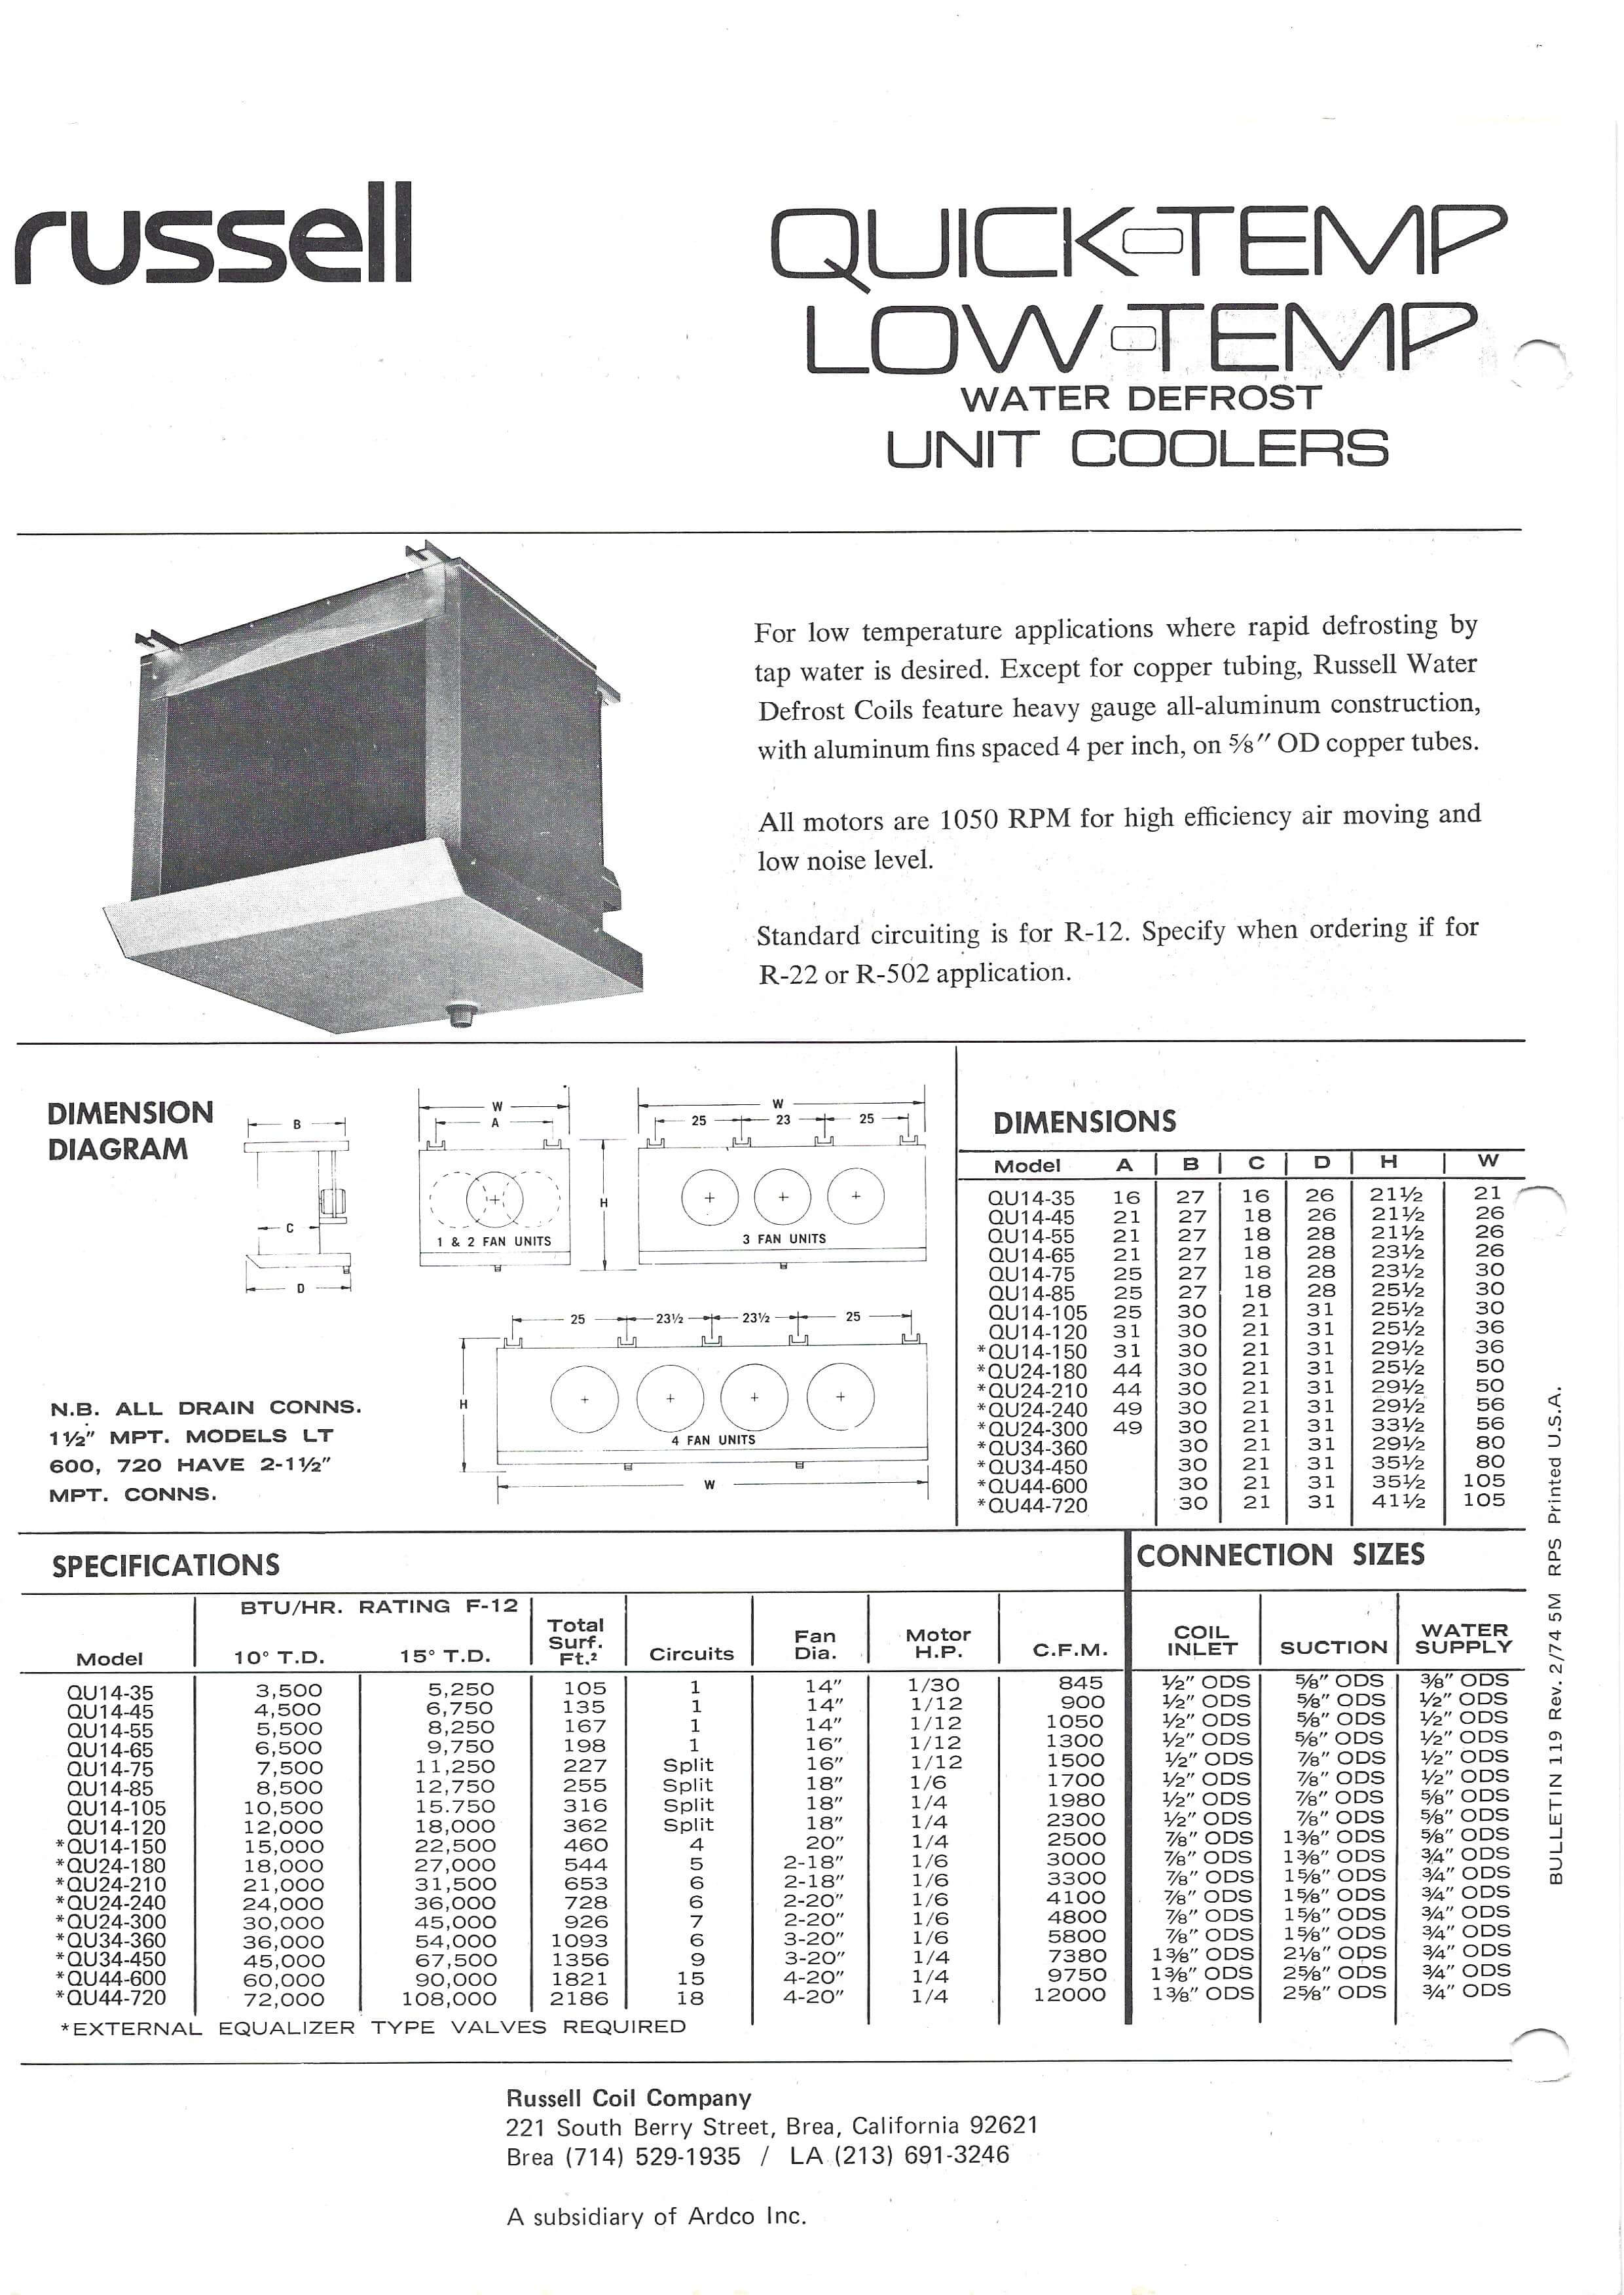 Quick-Temp Low-Temp Water Defrost Unit Coolers 1974